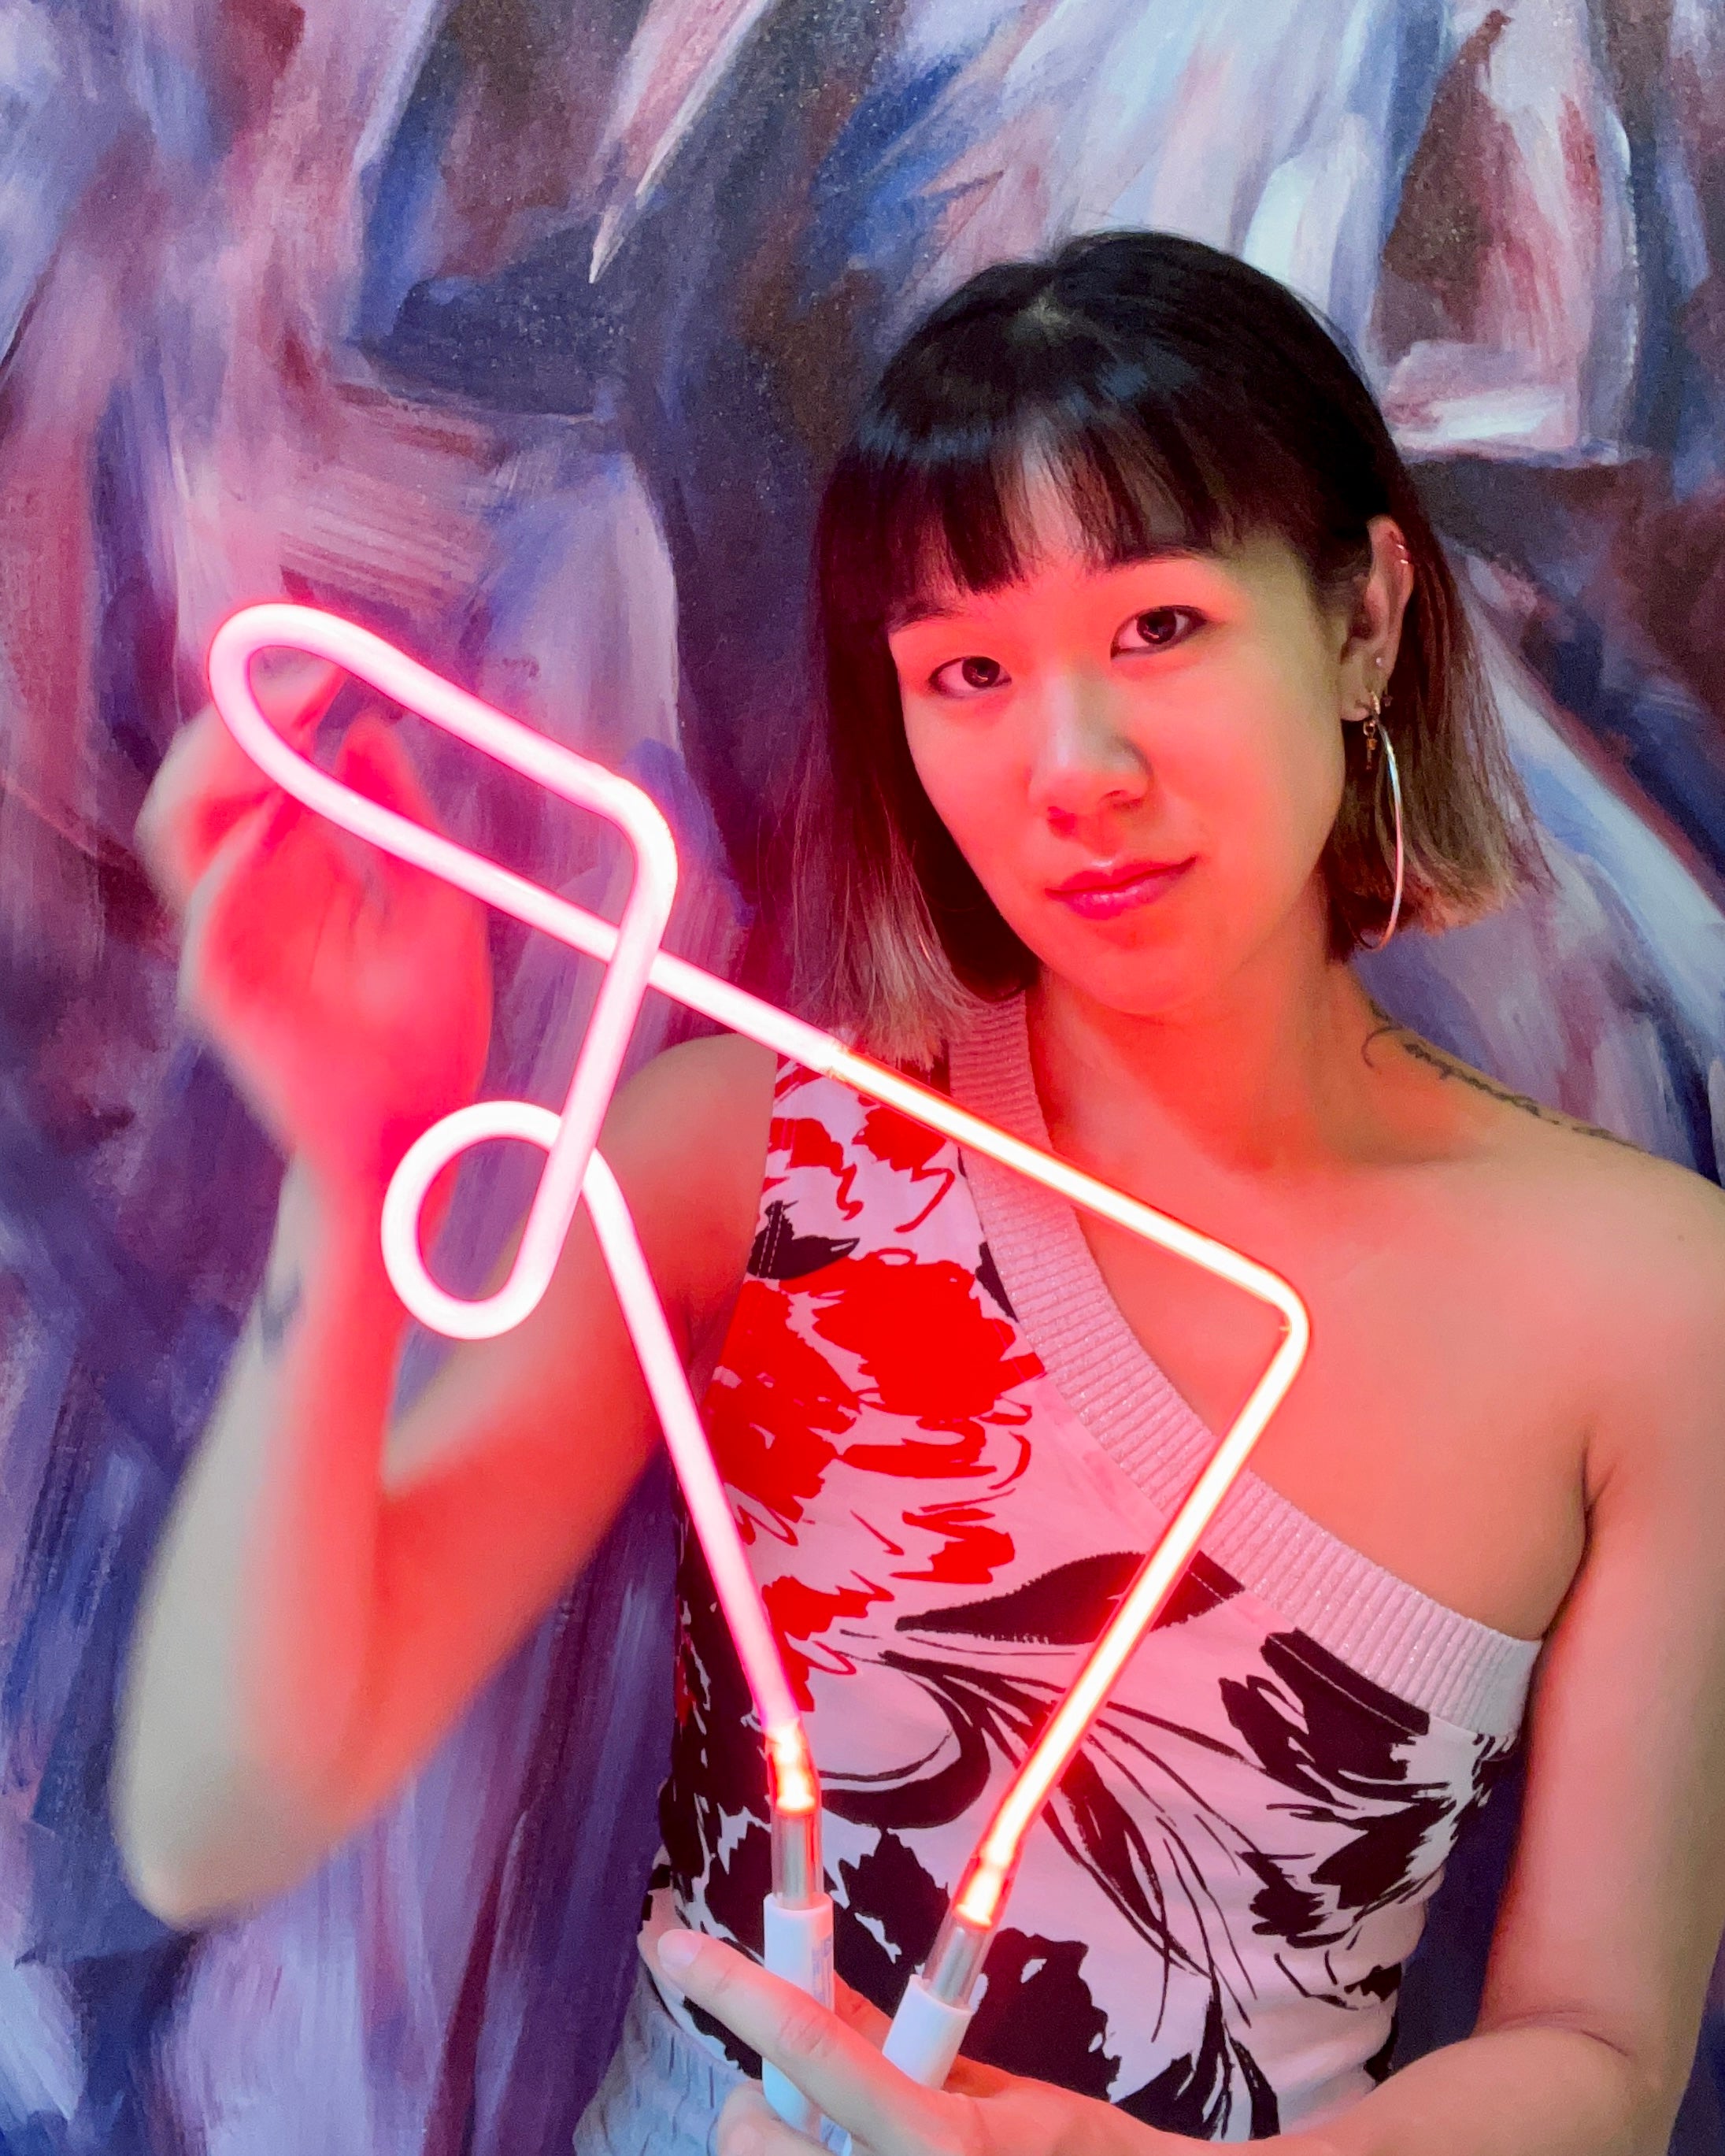 Bonnie holding an abstract neon art piece